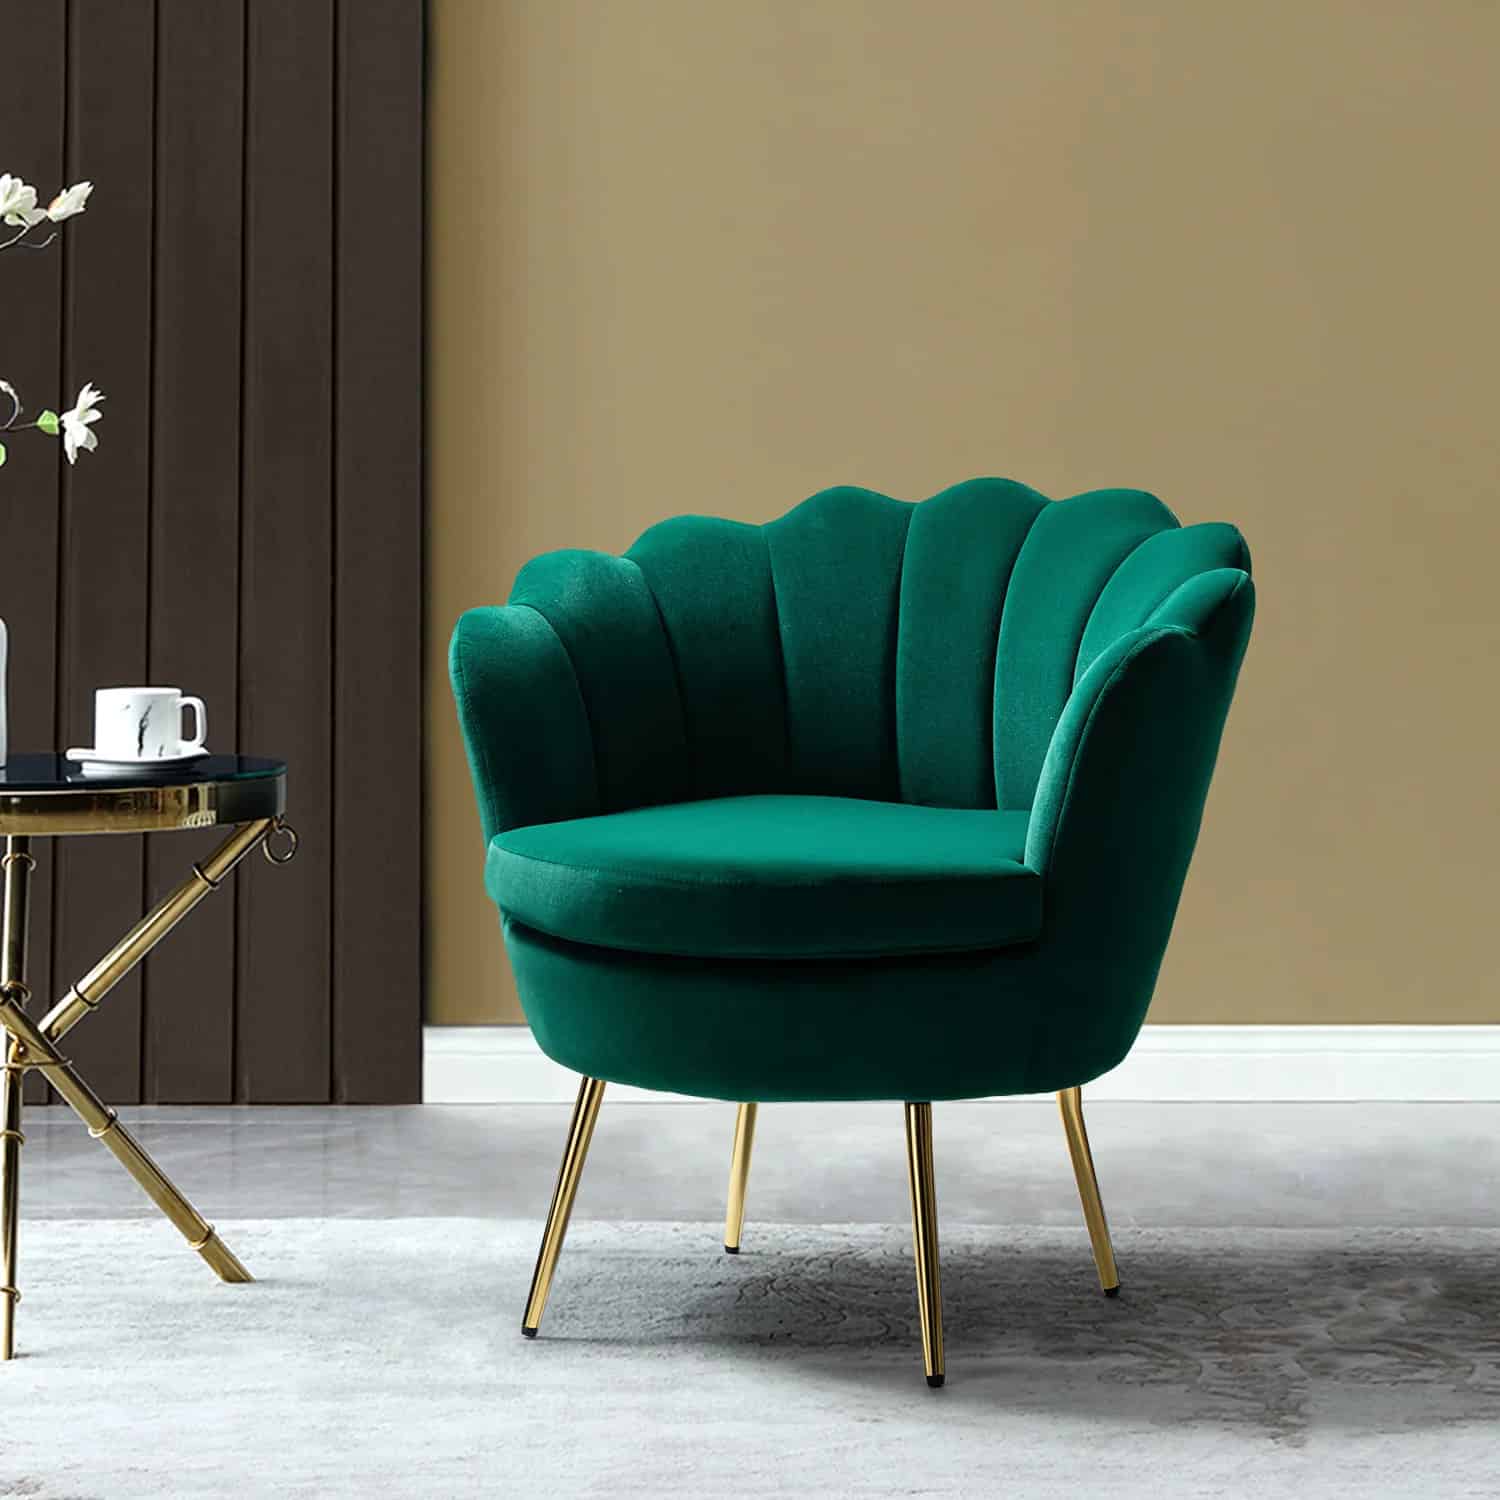 Add A Dash Of Elegance With An Emerald Green Chair